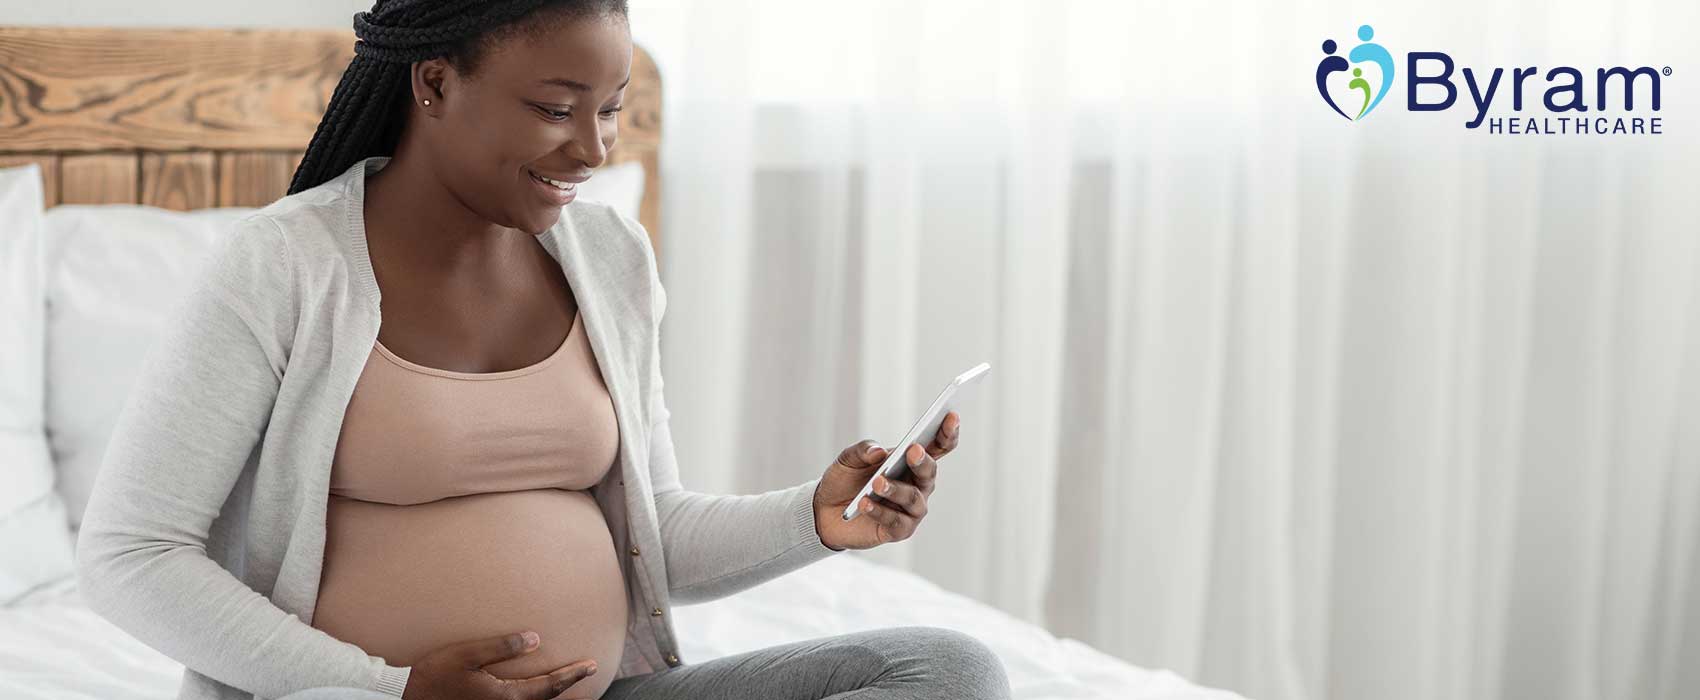 Pregnant lady looking at her phone, smiling.